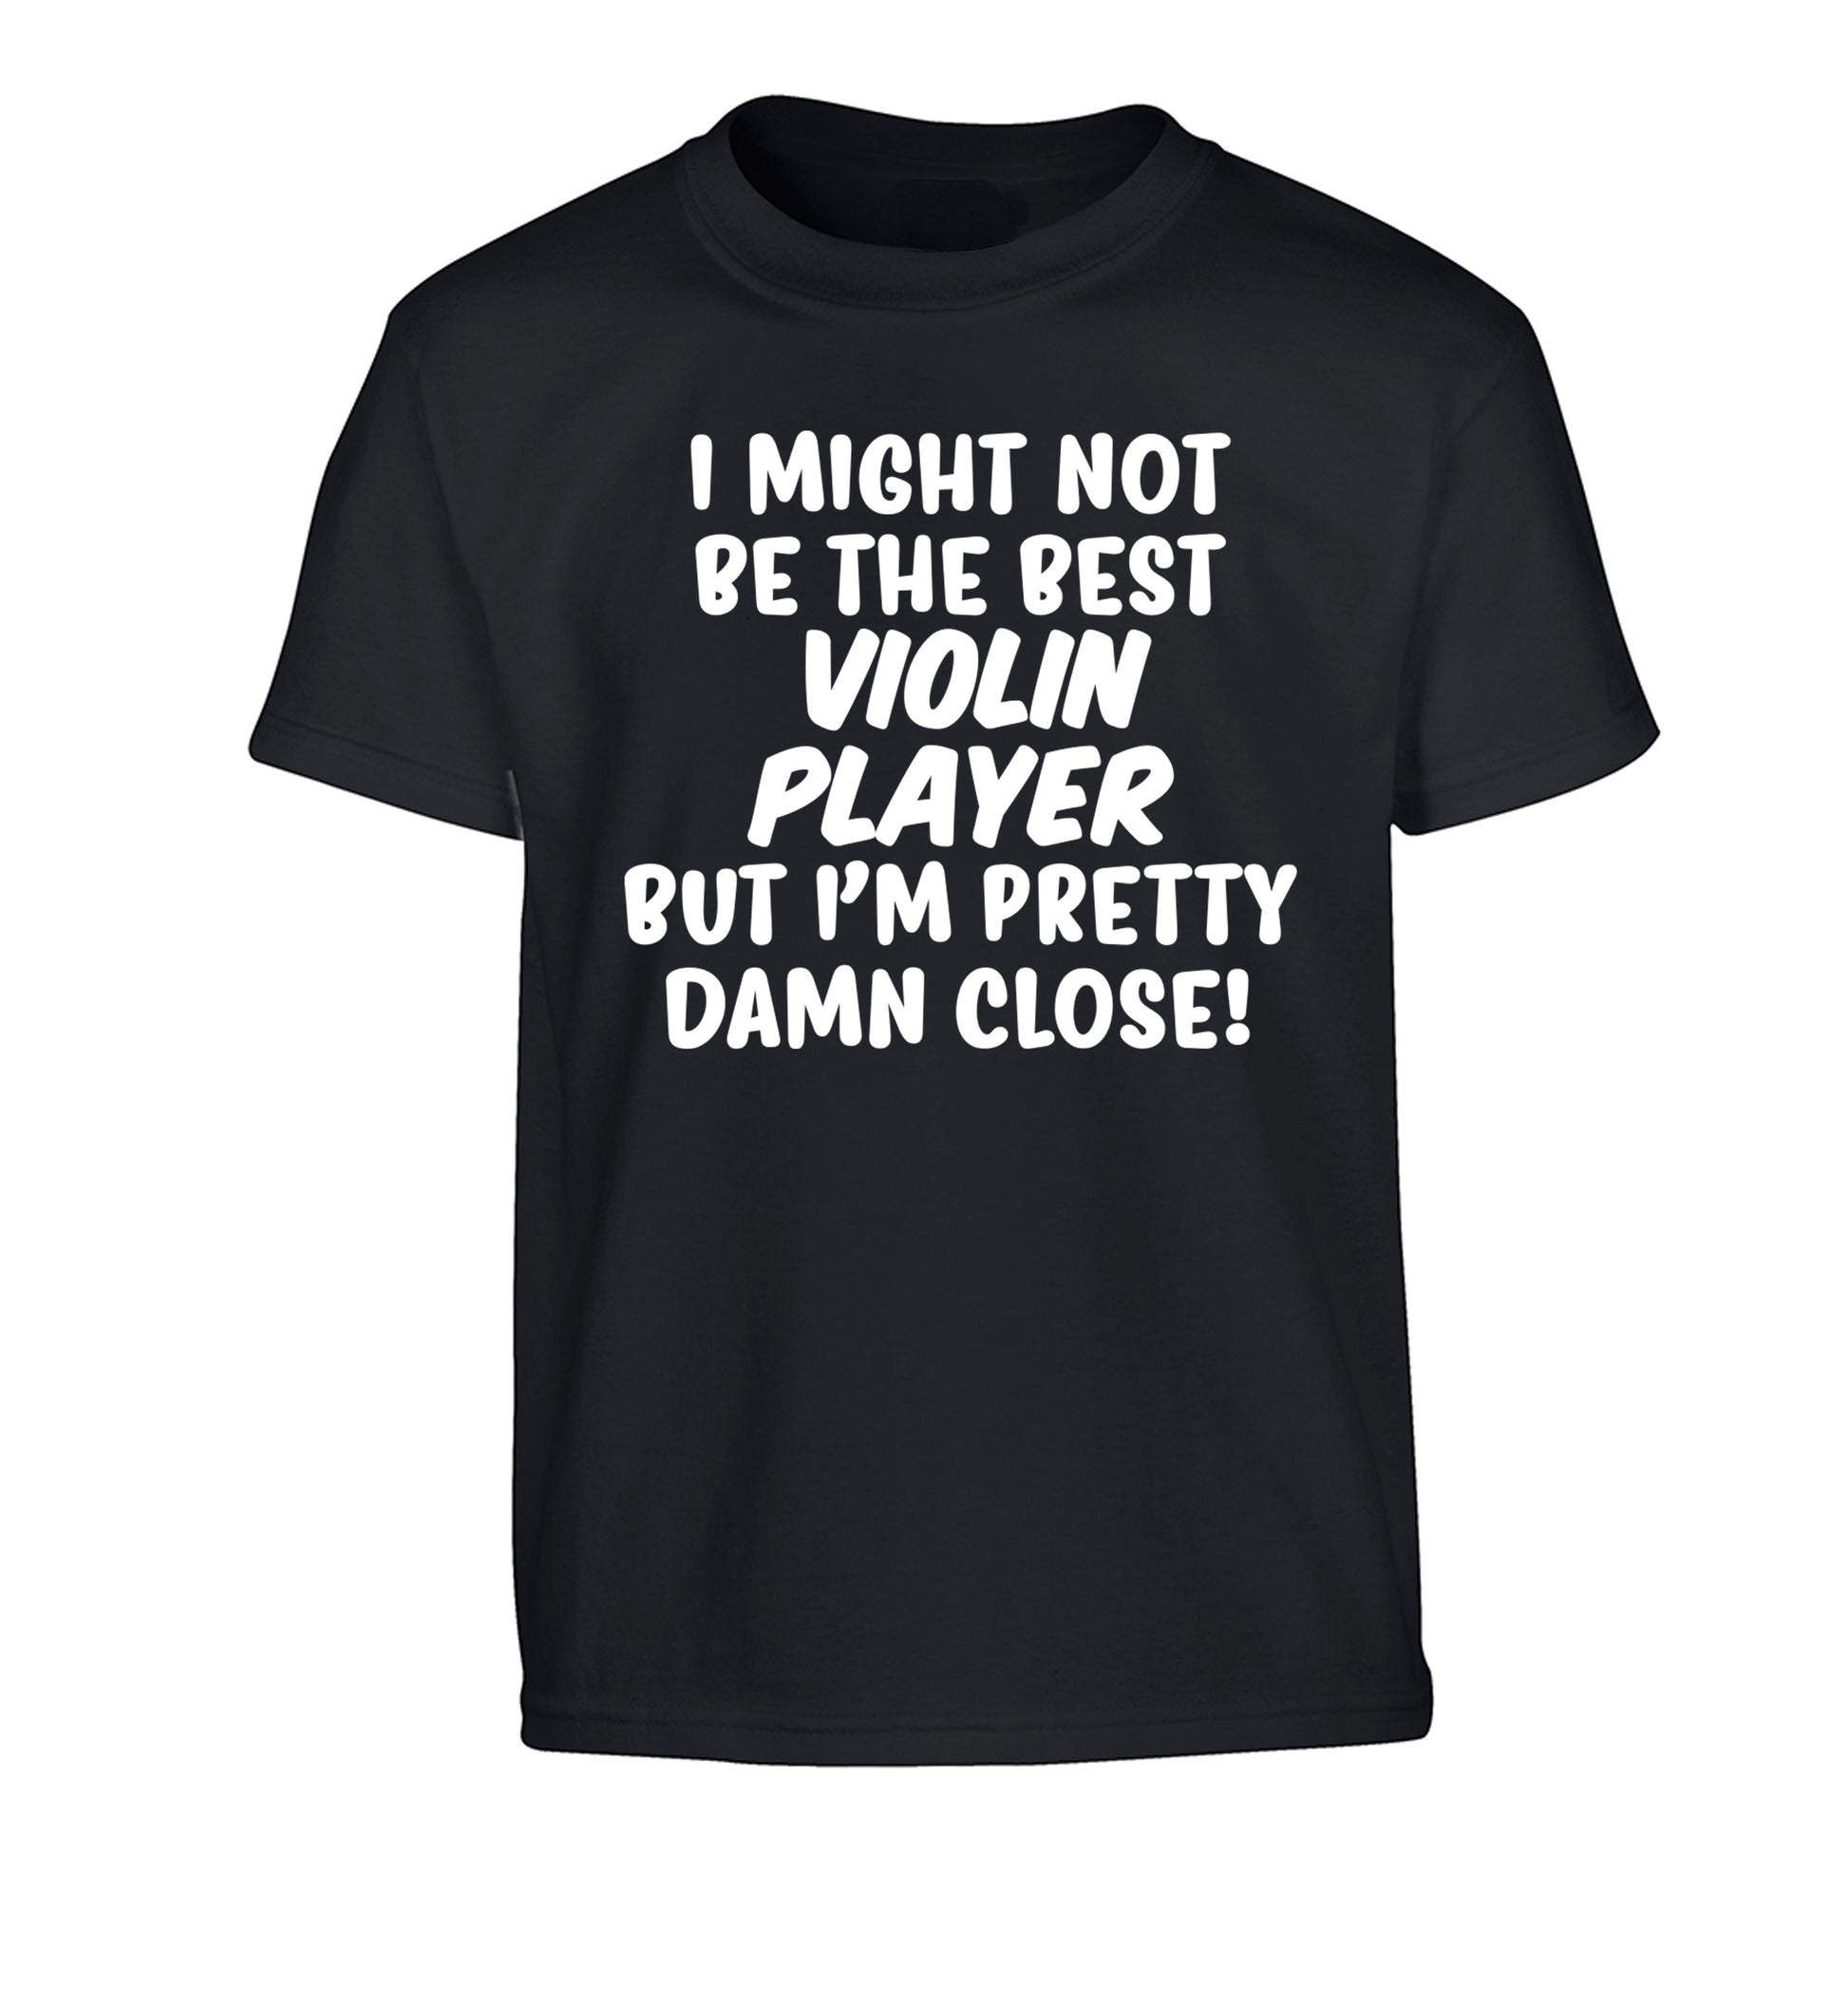 I might not be the best violin player but I'm pretty close Children's black Tshirt 12-13 Years